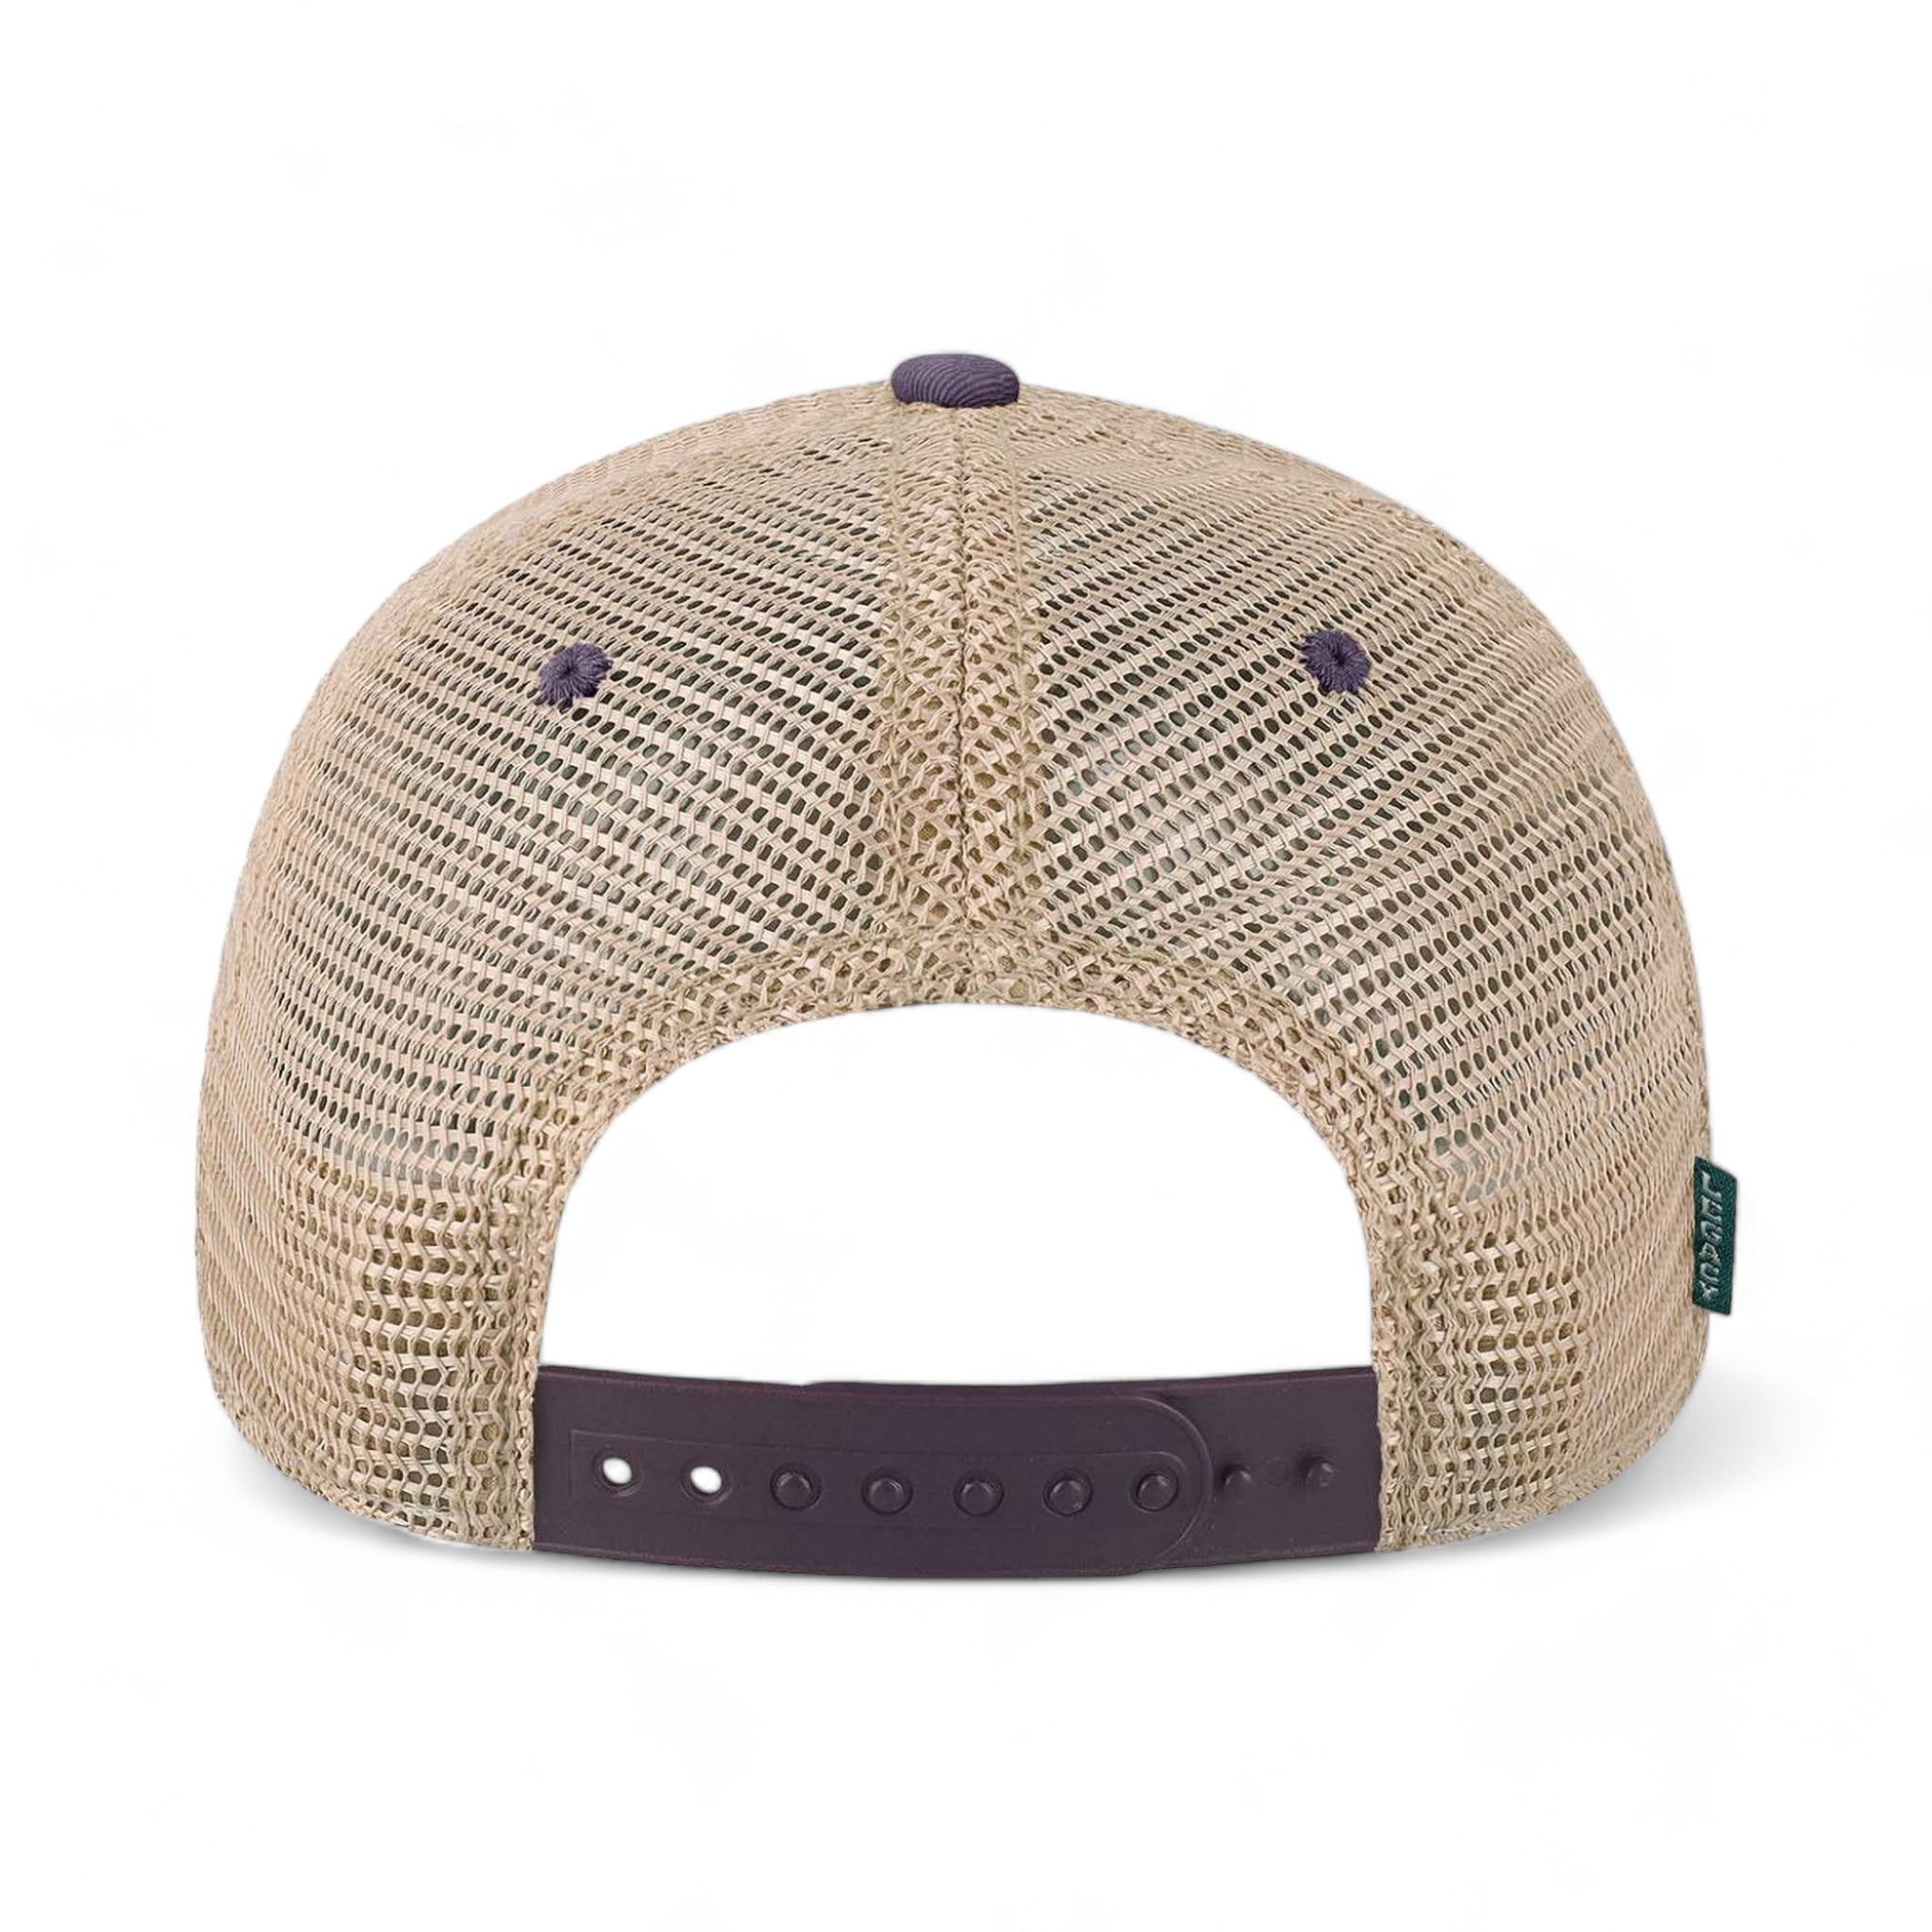 Back view of LEGACY OFAY custom hat in purple and khaki